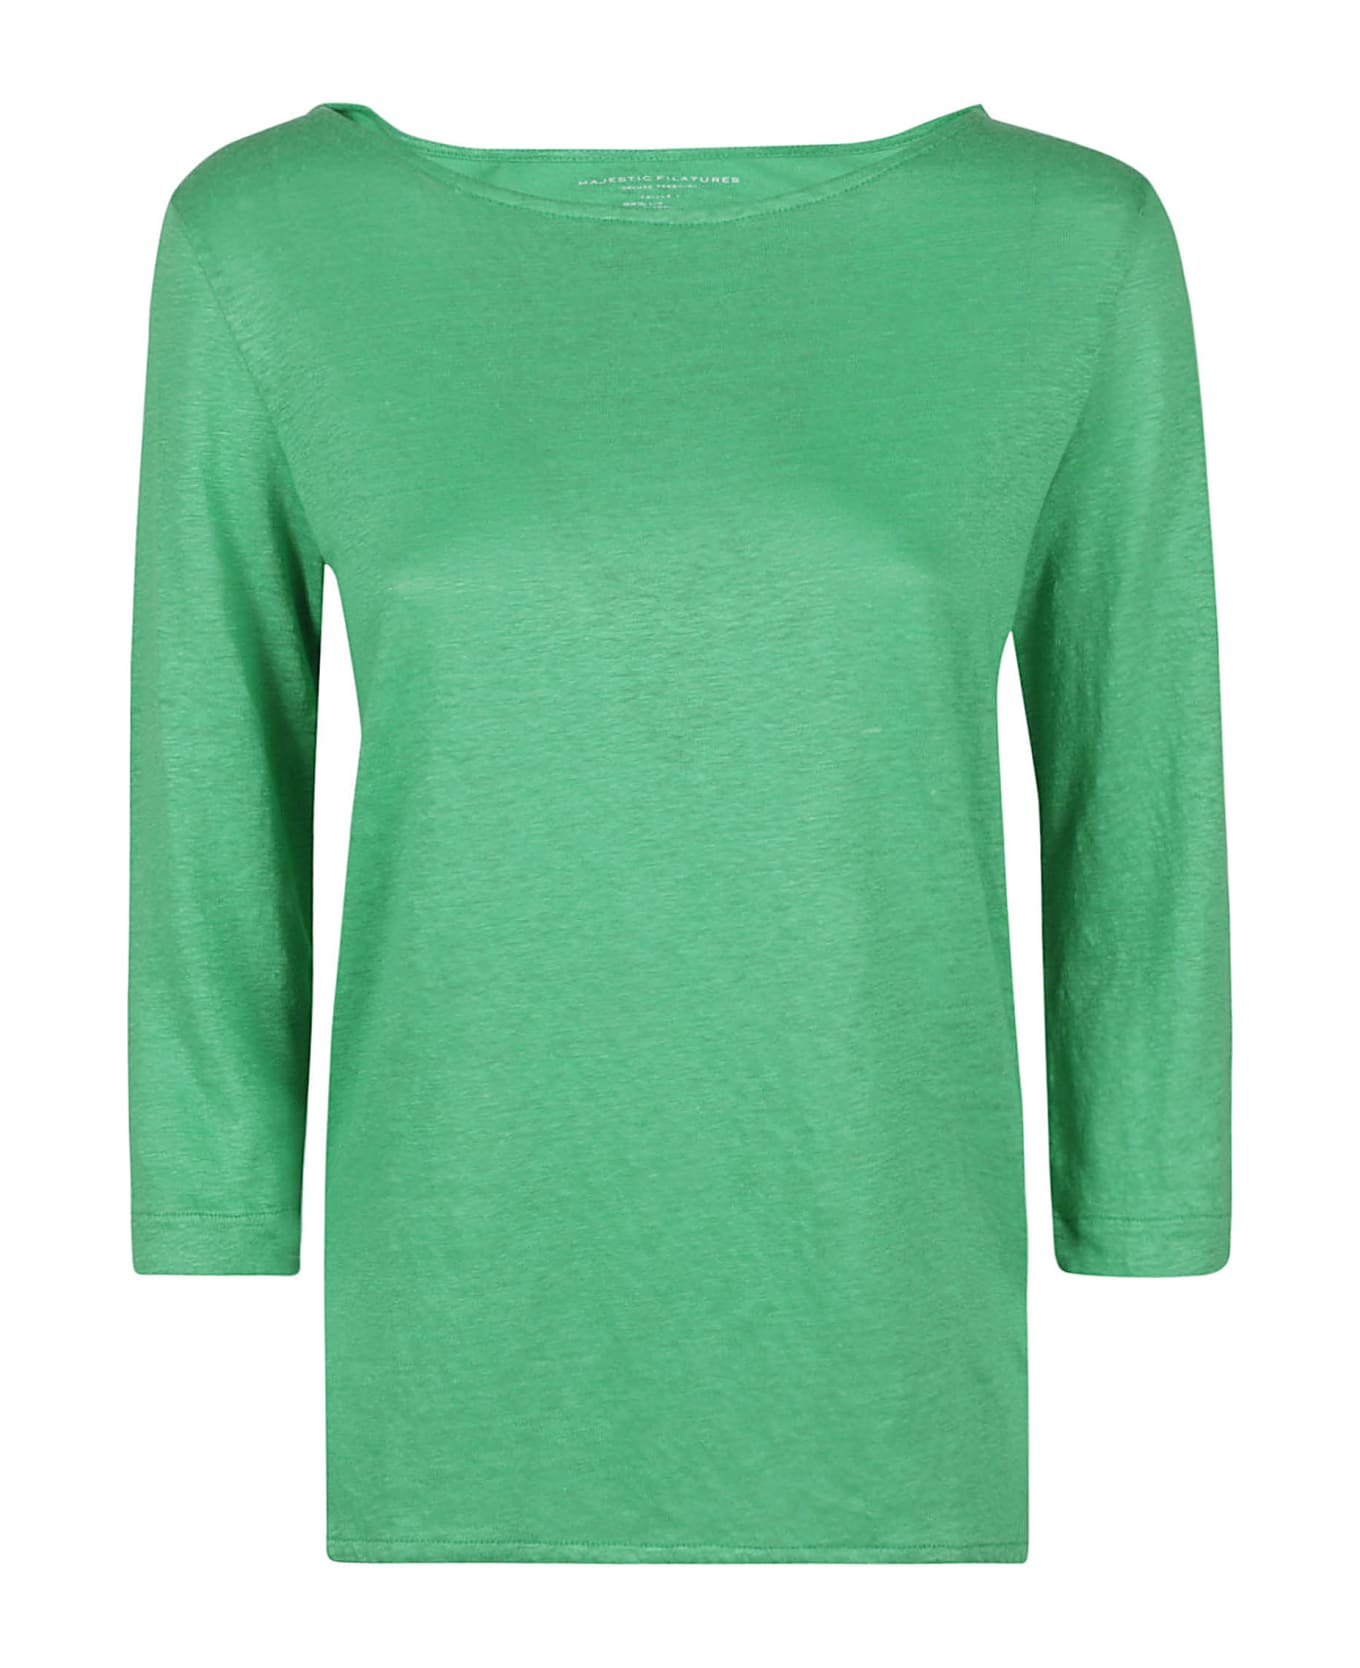 Majestic Filatures Majestic T-shirts And Polos Green - Green